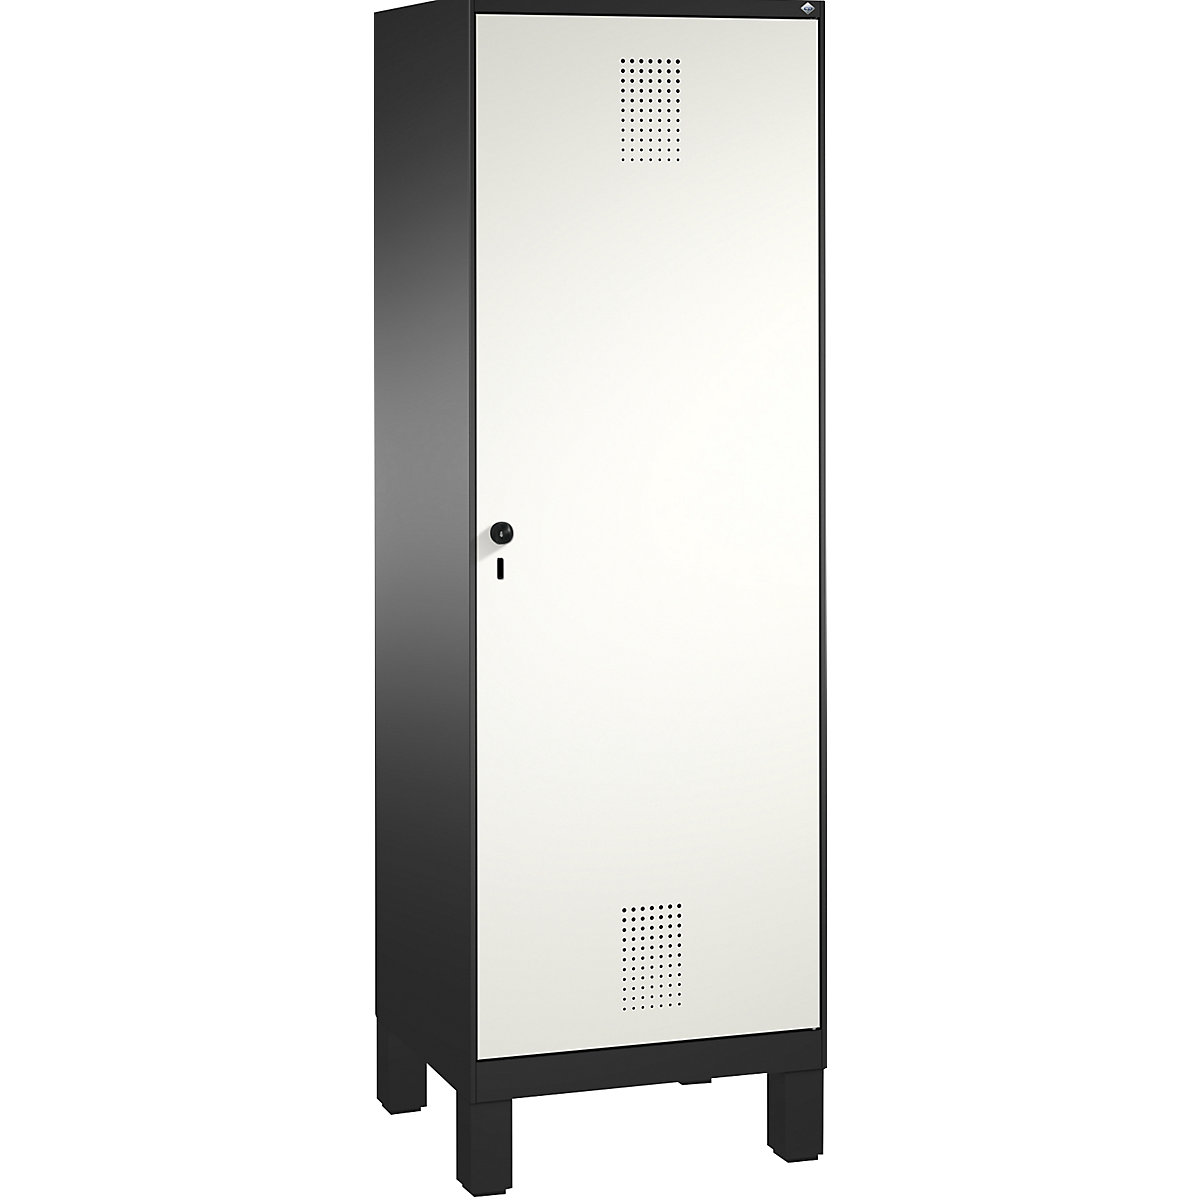 EVOLO cloakroom locker, door for 2 compartments, with feet – C+P, 2 compartments, 1 door, compartment width 300 mm, black grey / traffic white-5